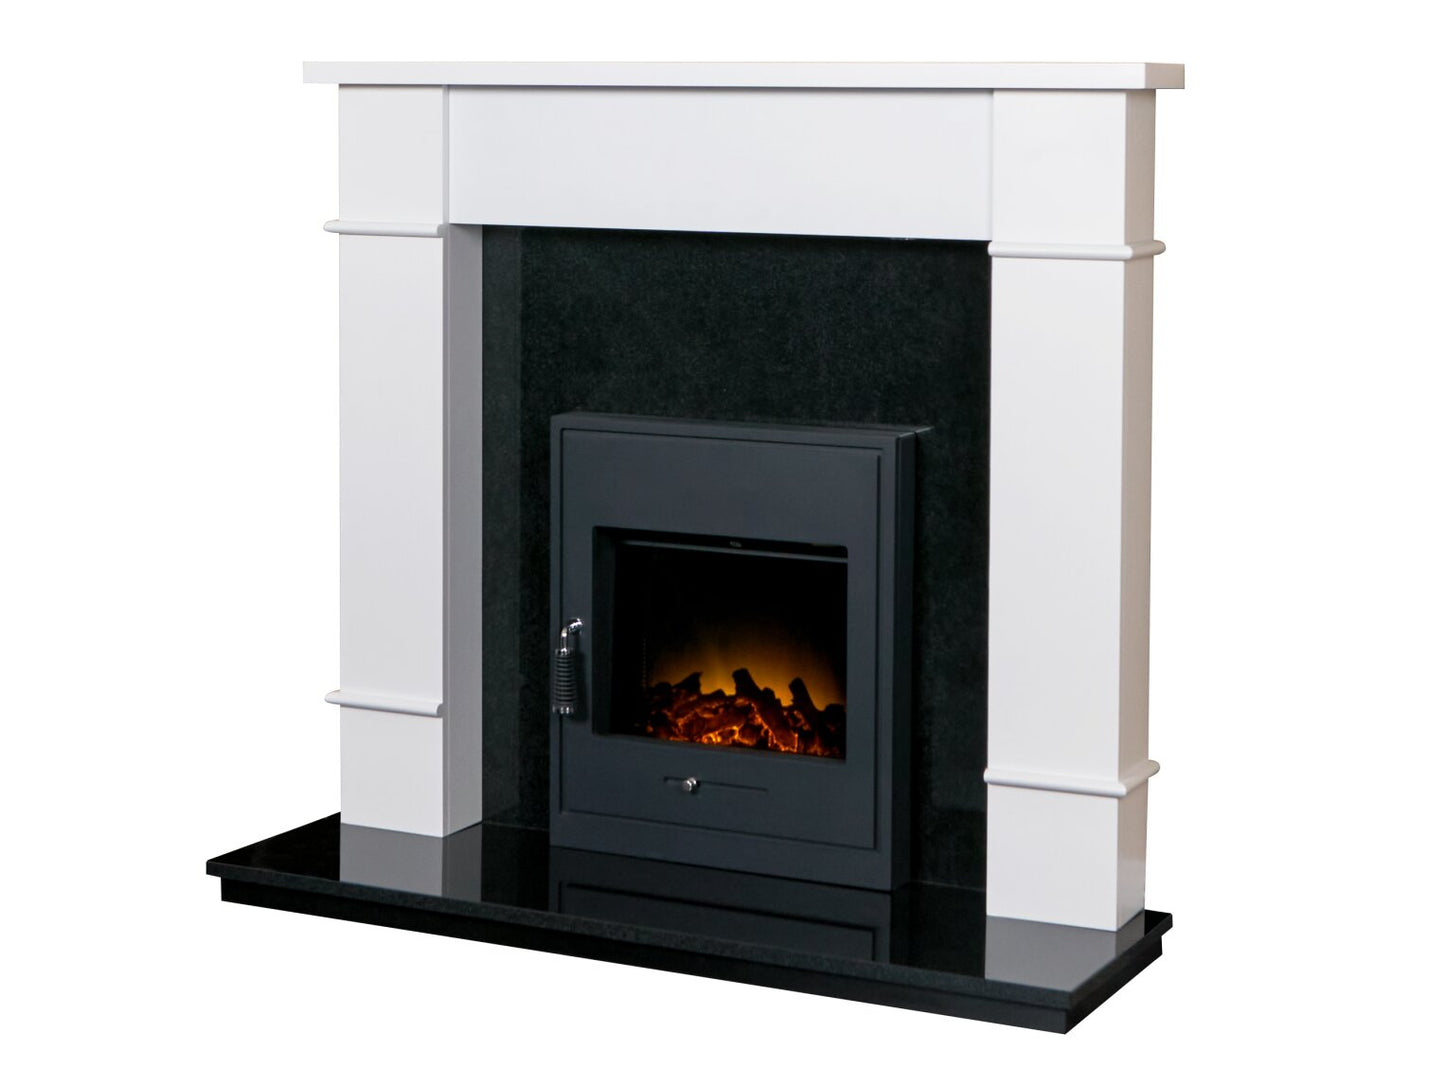 Adam Linton Fireplace with Downlights 23130 White & Granite